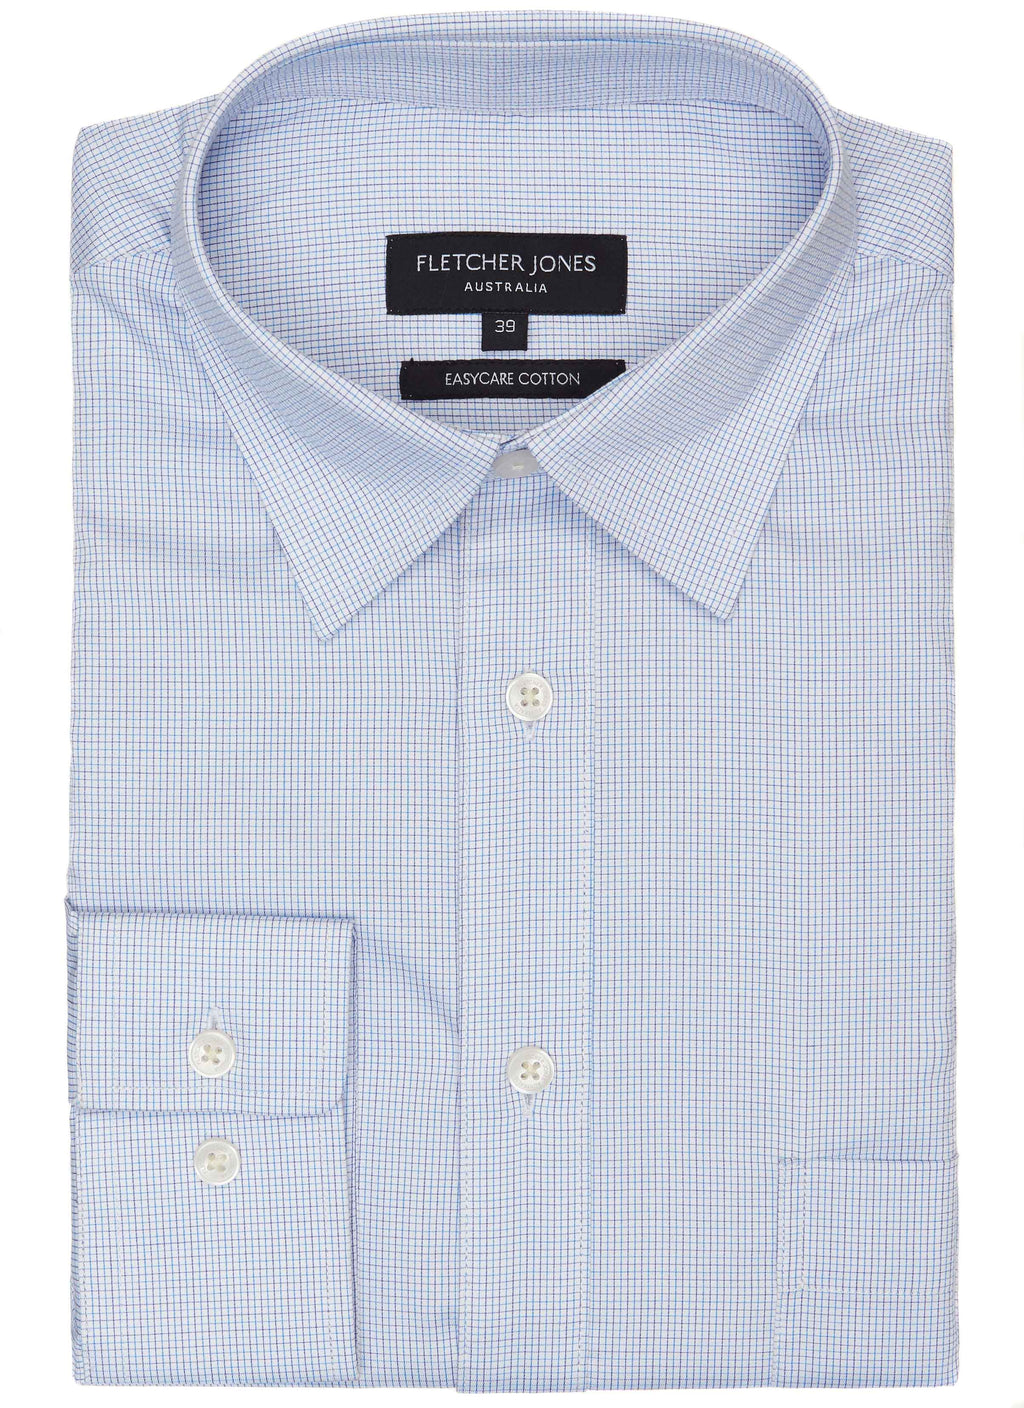 REEDY CLASSIC FIT BUSINESS SHIRT